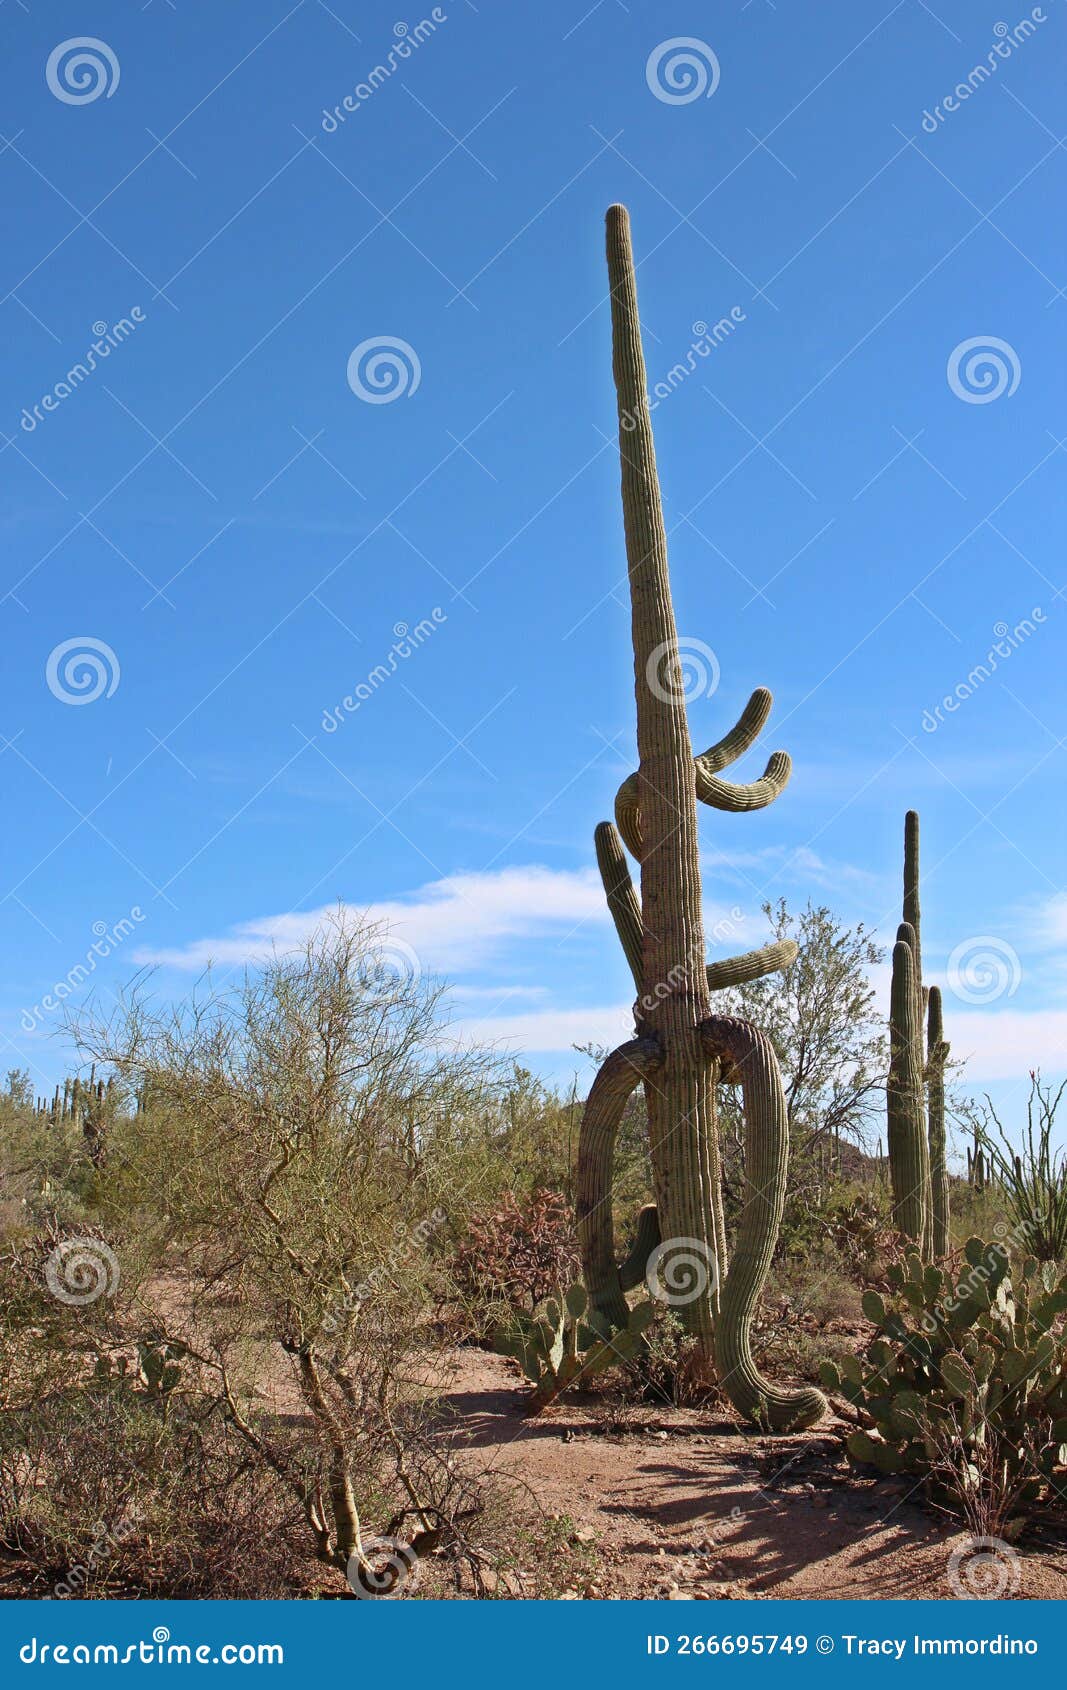 large, unusually d saguaro cactus in a desert landscape with prickly pear, ocotillo and palo verde bushes in arizona